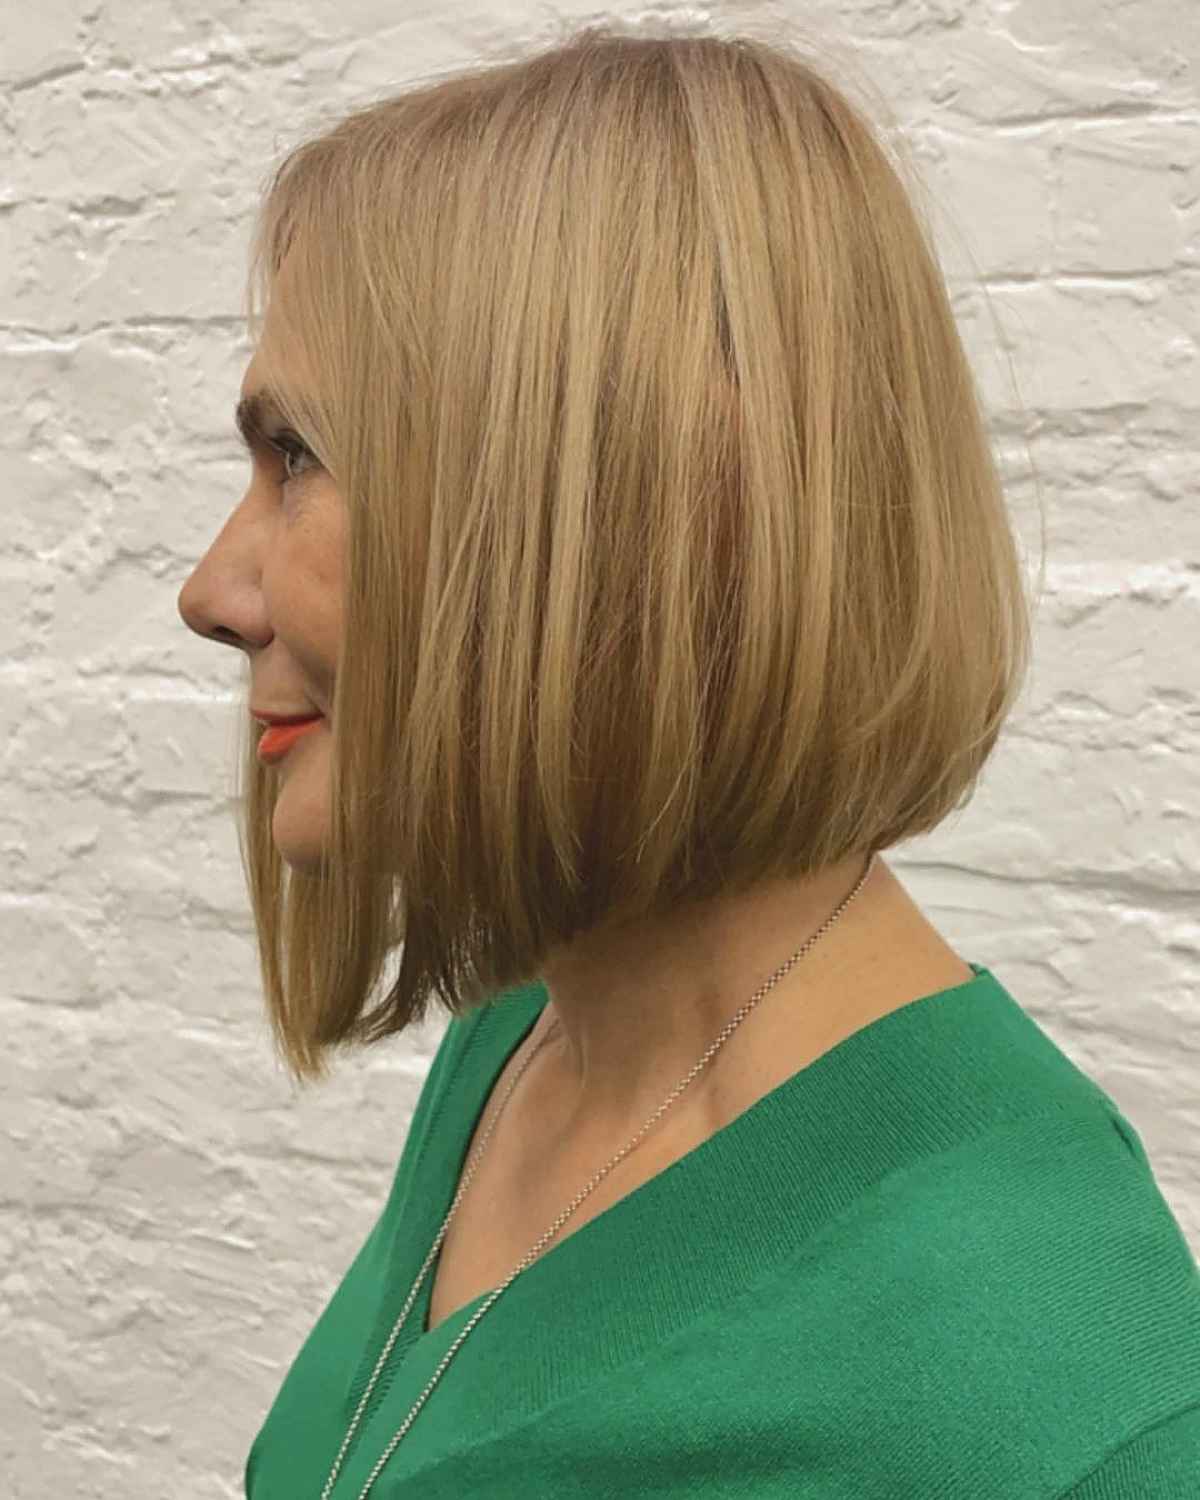 Neck-Length Bob Haircut for Women Past Their 40s with Fine Hair